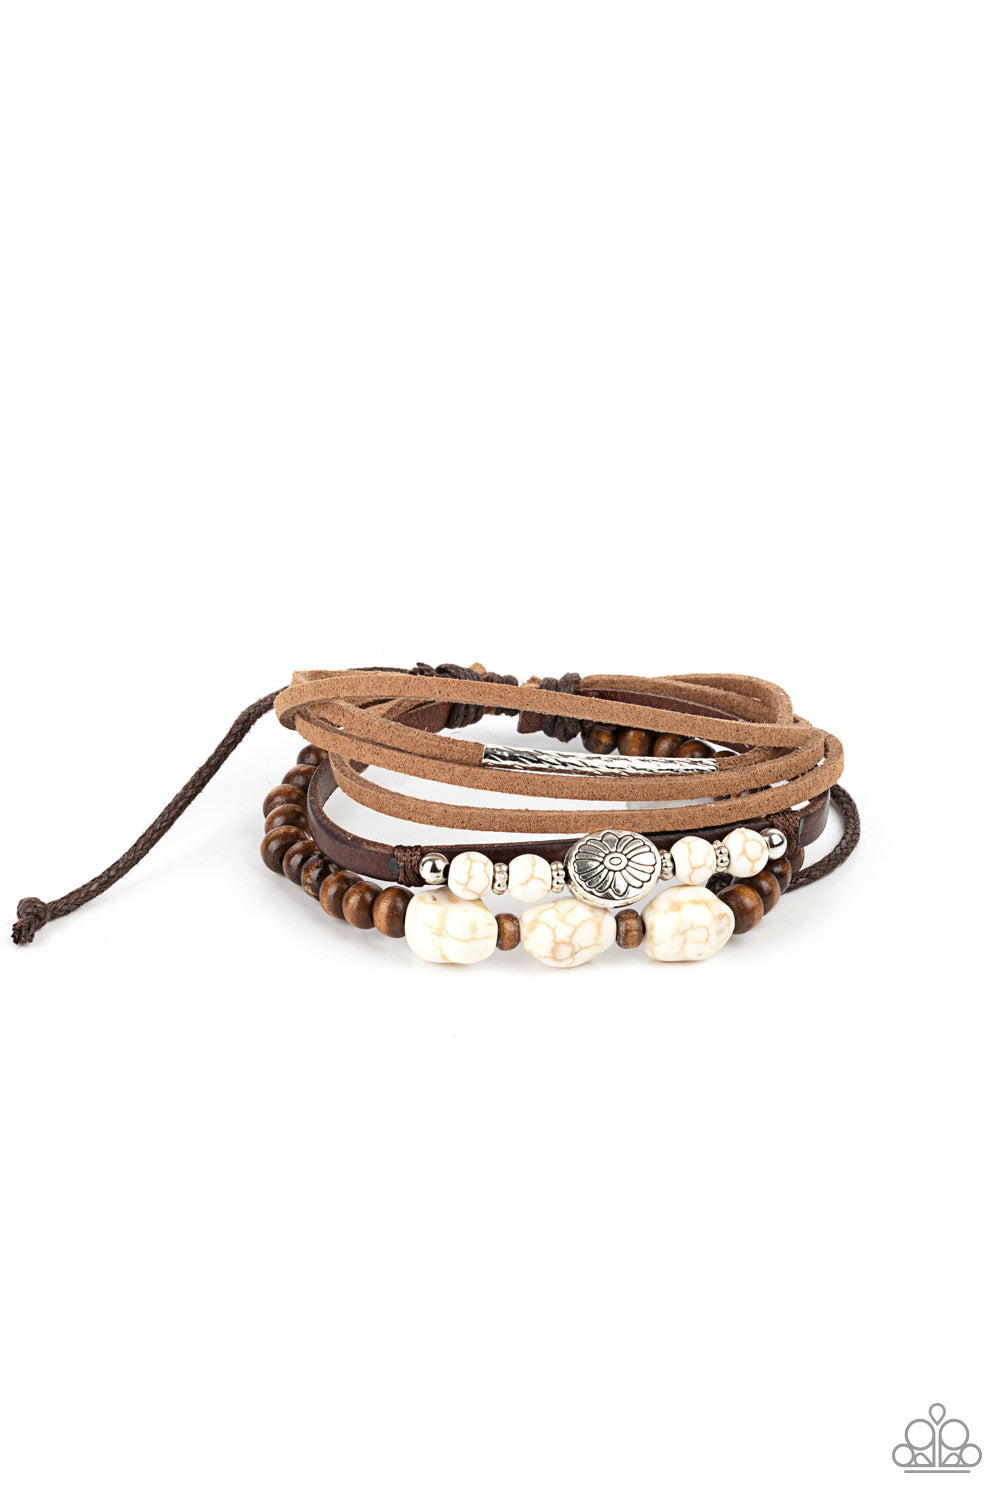 Act Natural White Urban Bracelet - Paparazzi Accessories  Featuring natural white stone and silver accents, a collection of leather strands and wooden beads encircle the wrist in a subtle Southwestern fashion. Features an adjustable sliding knot closure.  Sold as one individual bracelet.